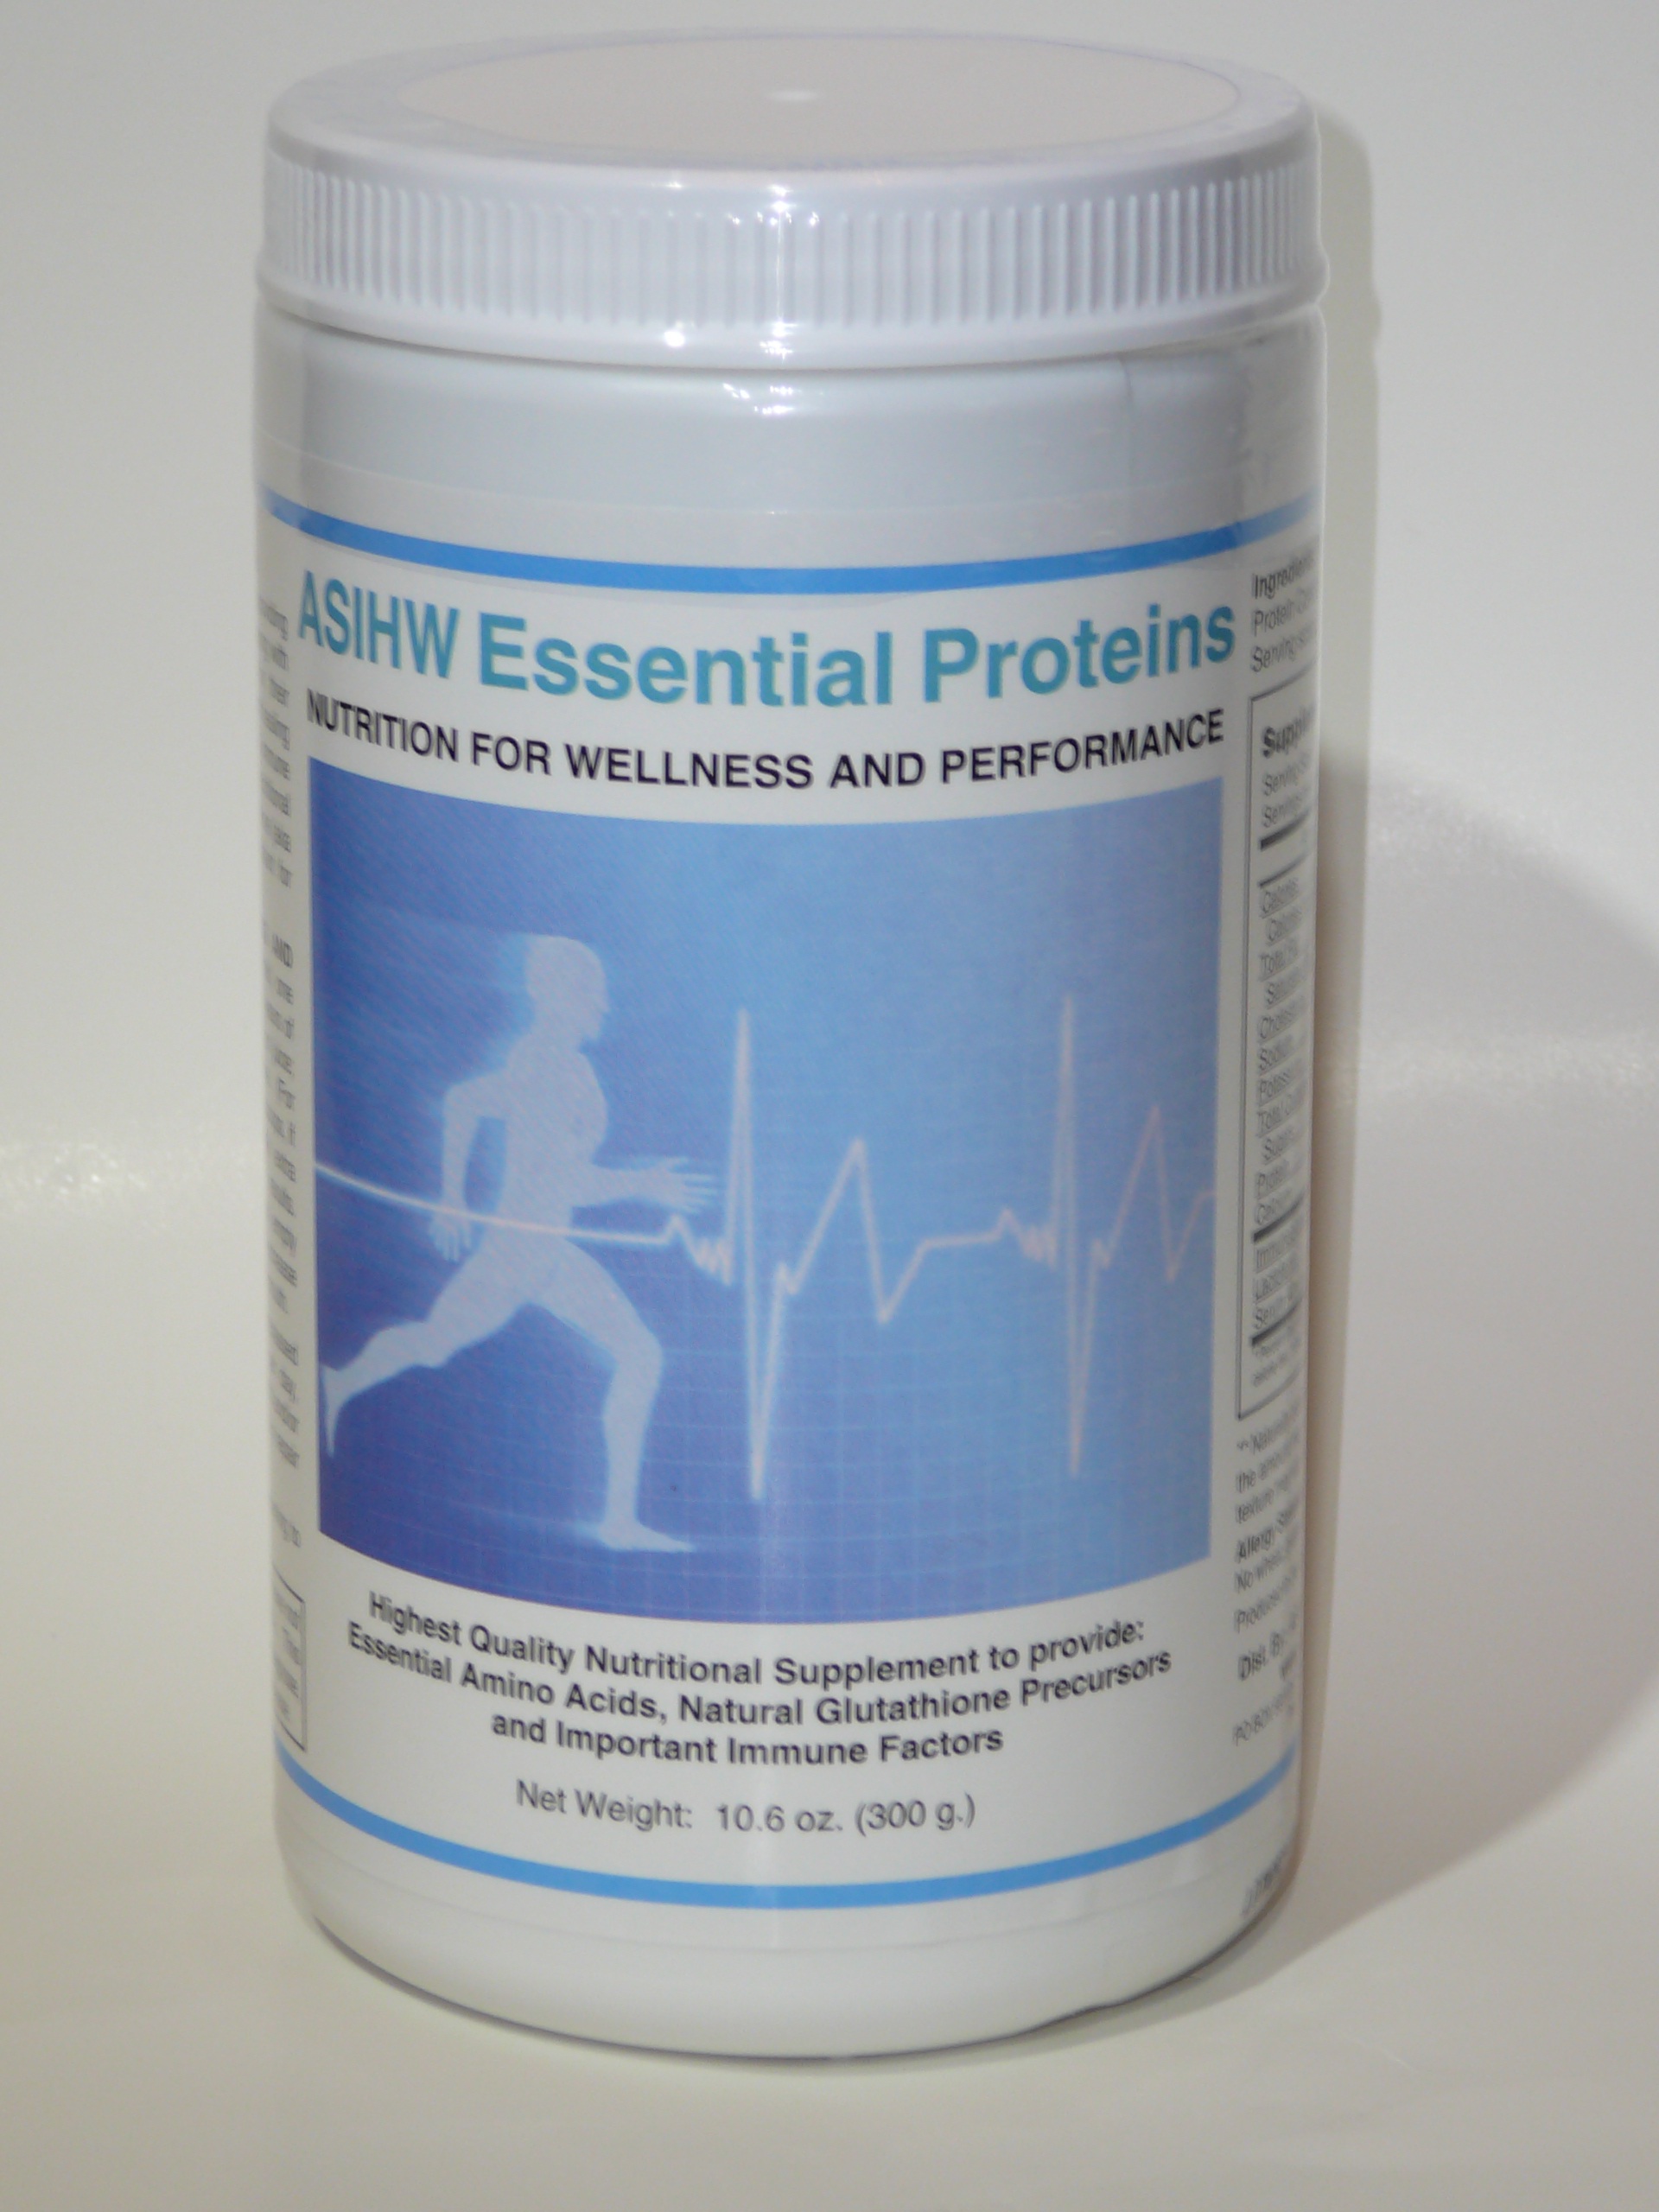 Glutathione (GSH) Precursors and Whey Protein   Natural GSH for every 